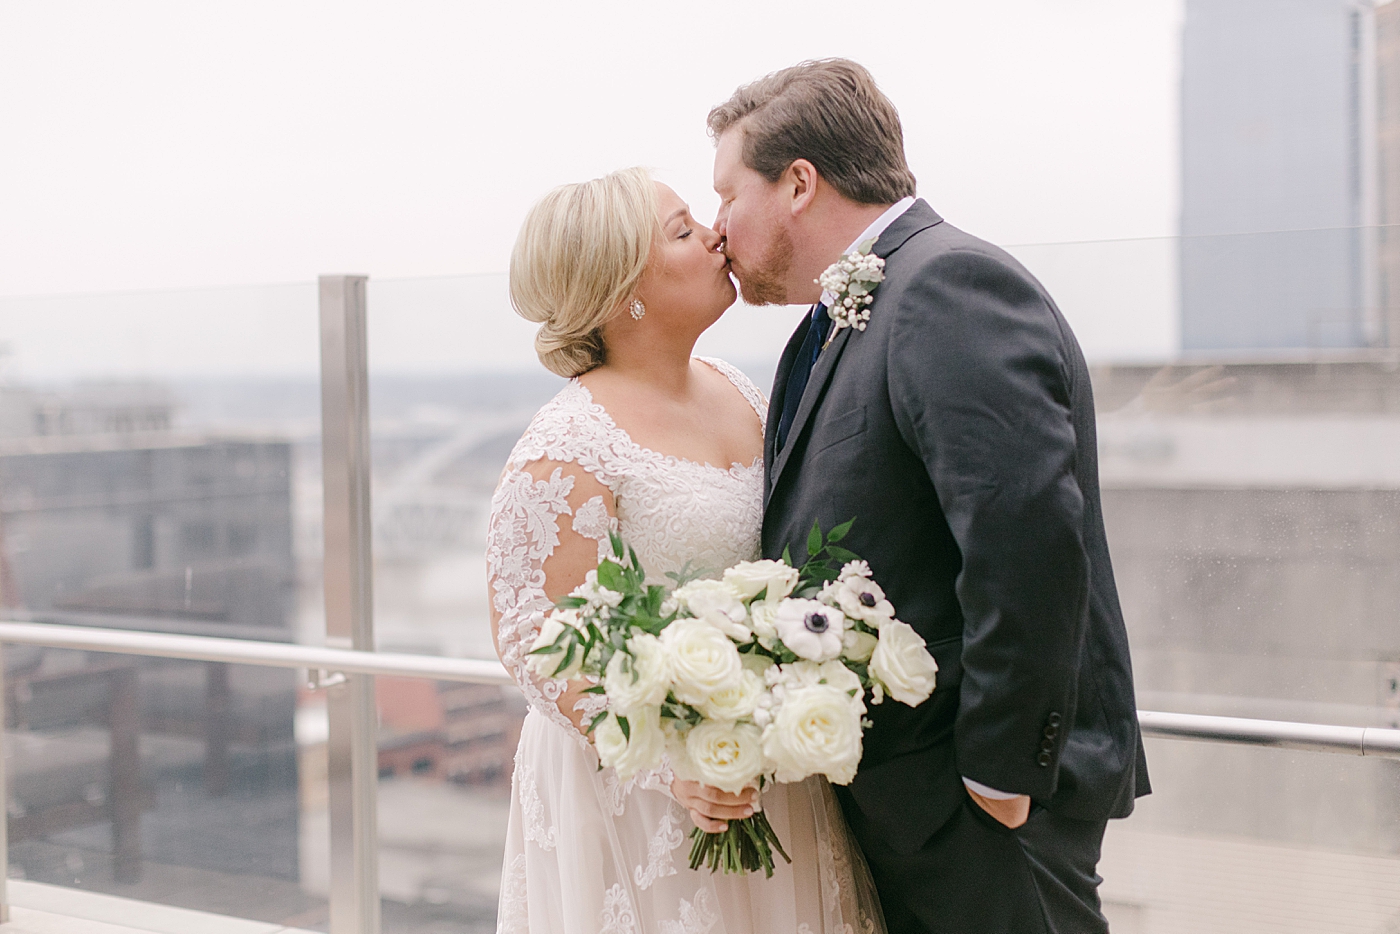 Bride and groom kissing on a rooftop | Photo by Hope Helmuth Photography